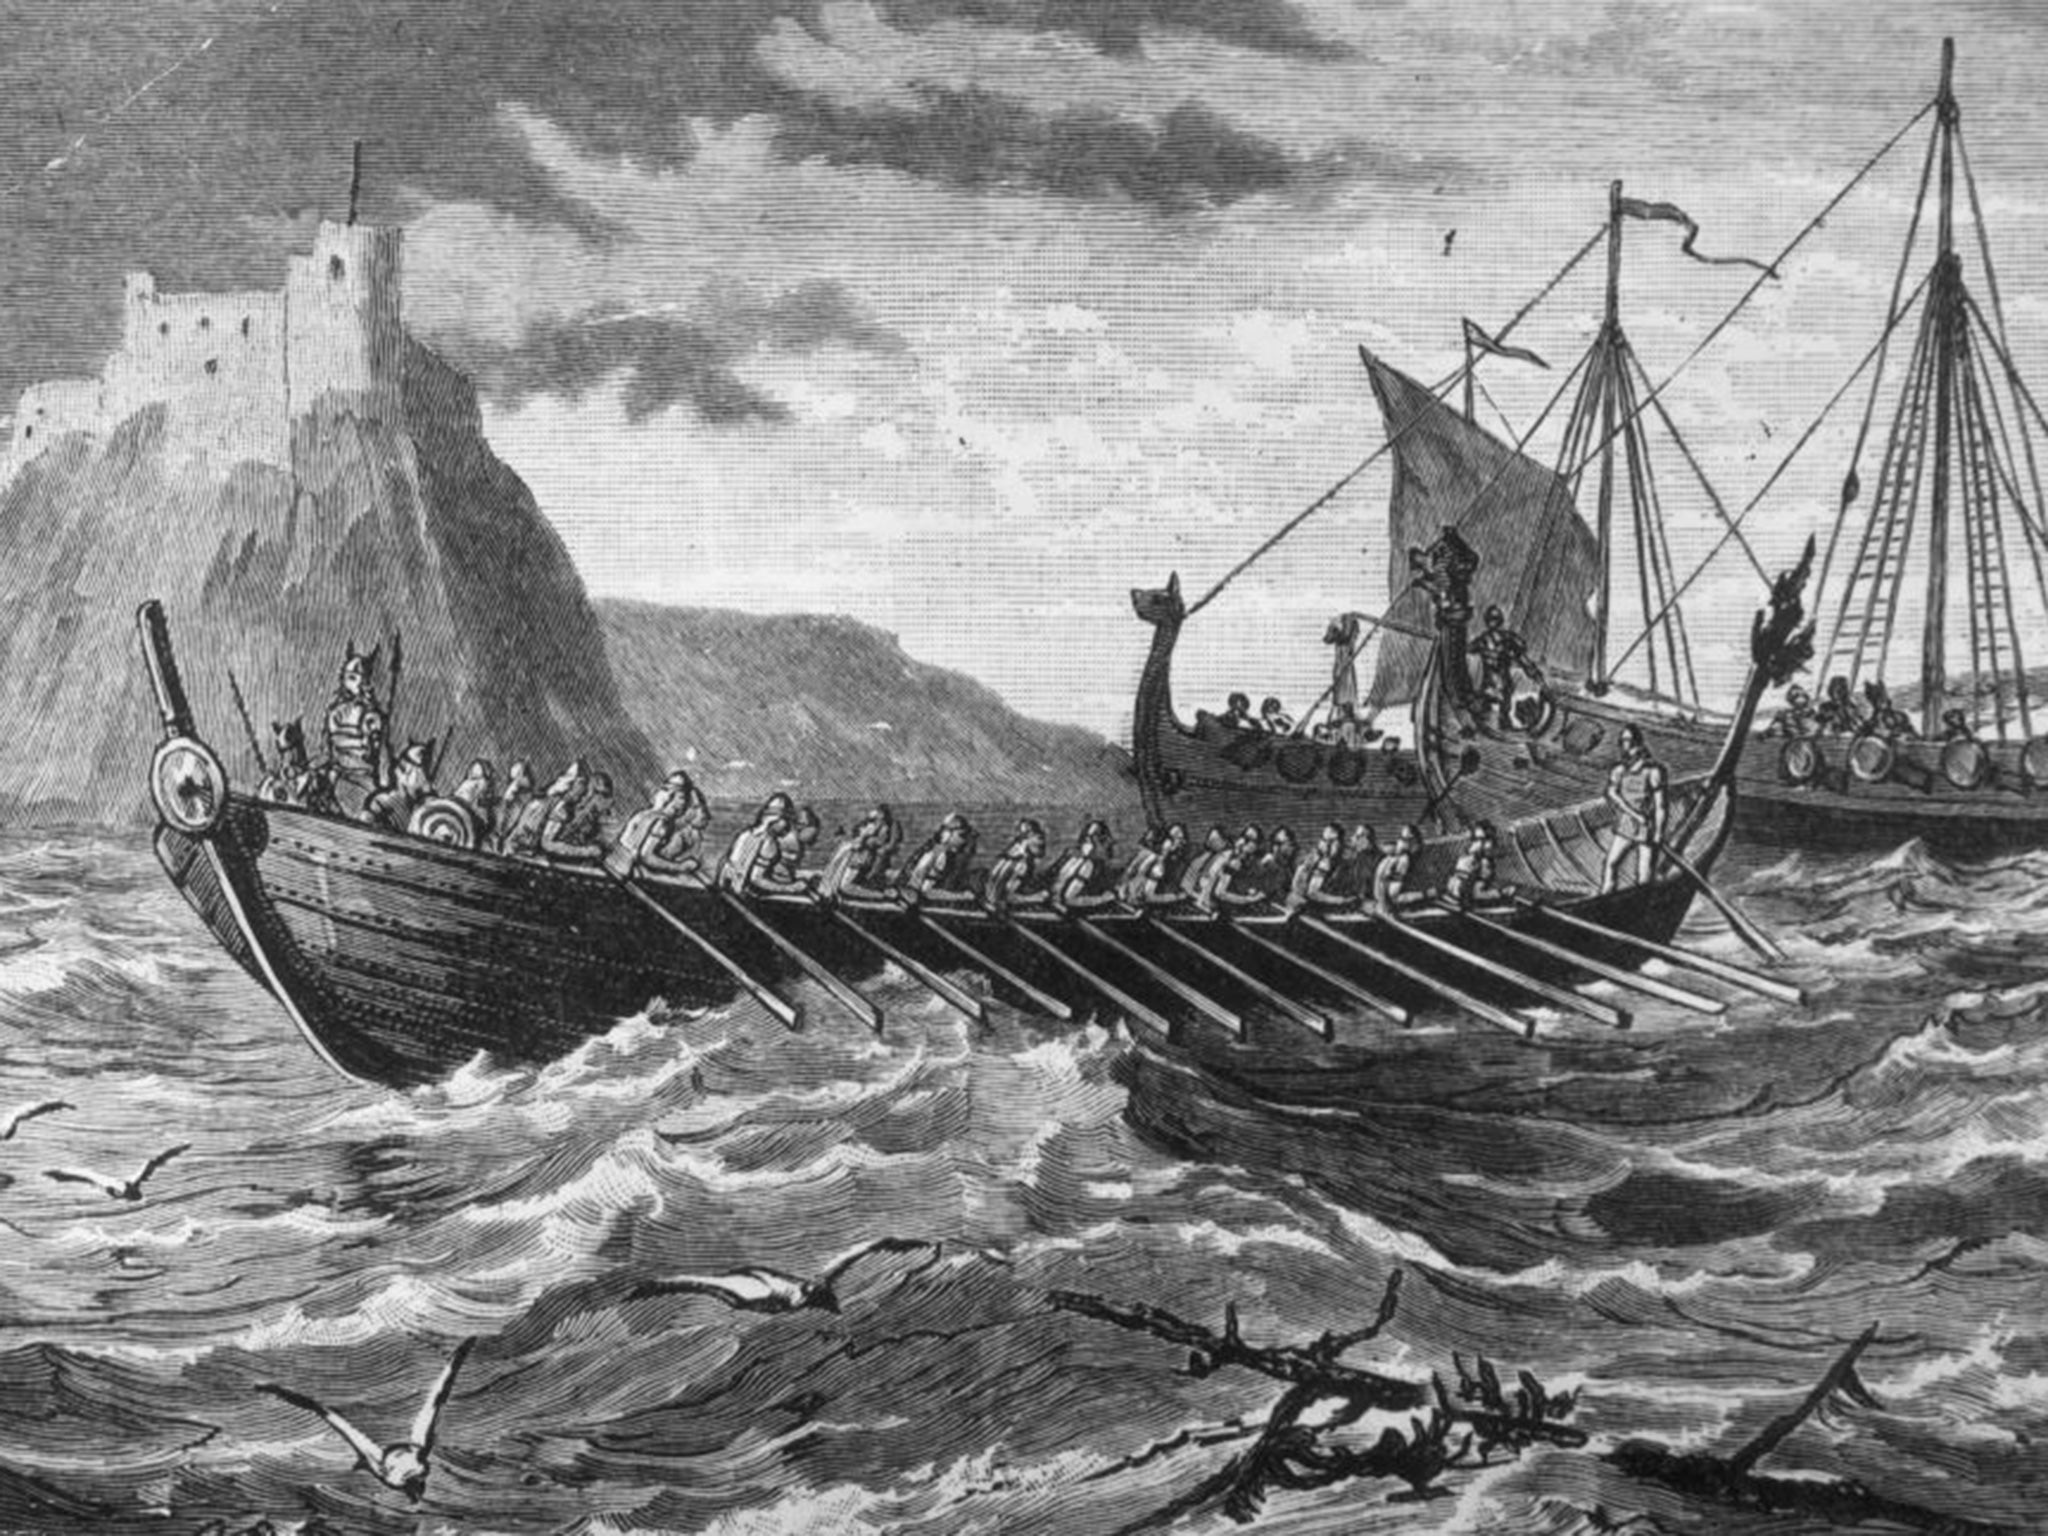 Thousands of Vikings lived in Greenland between 986 and 1350AD